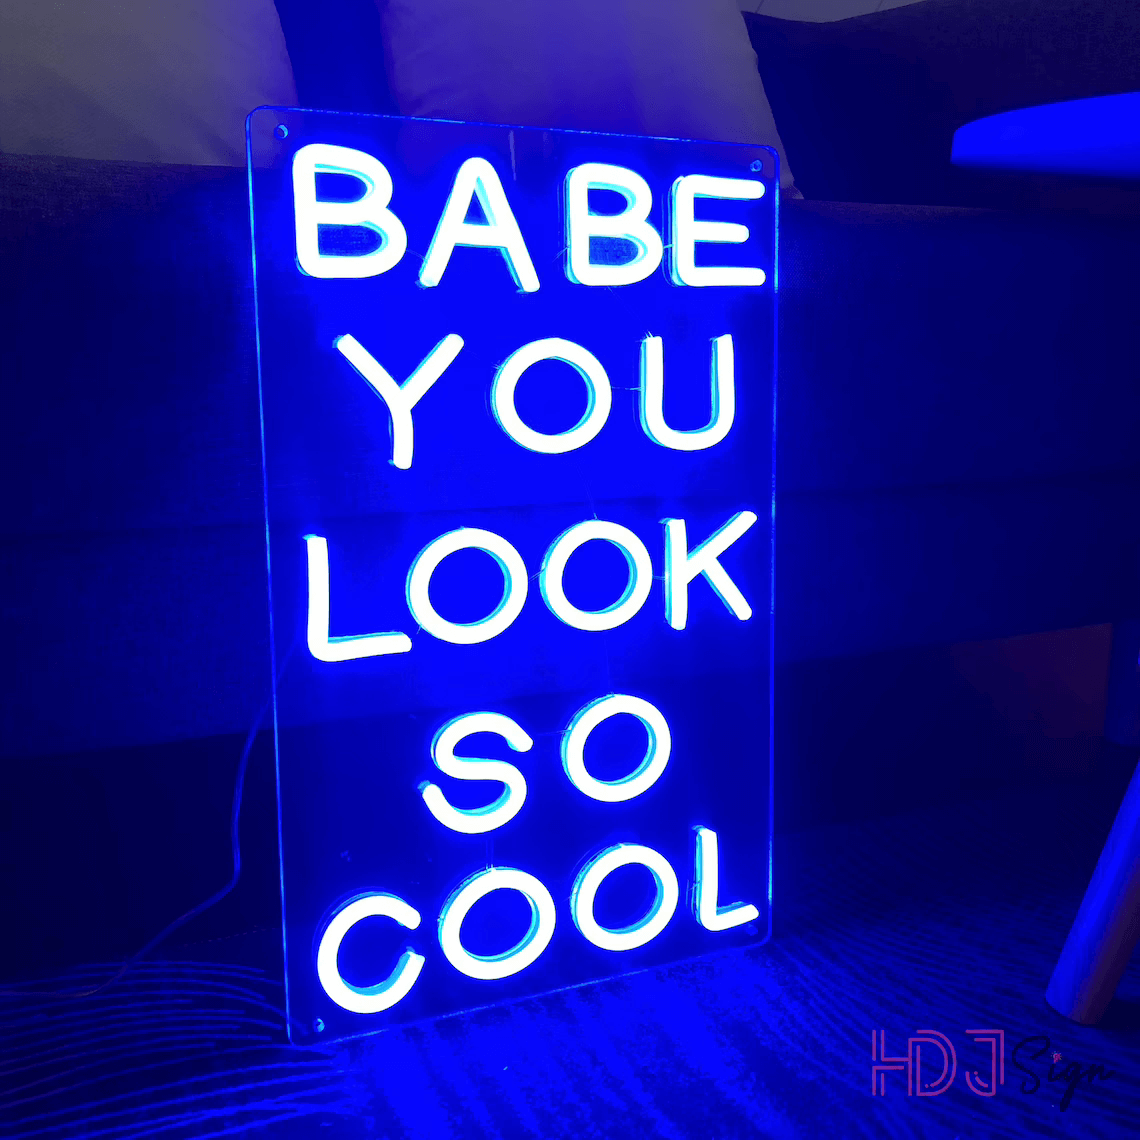 Babe You Look So Cool Neon Sign Lights